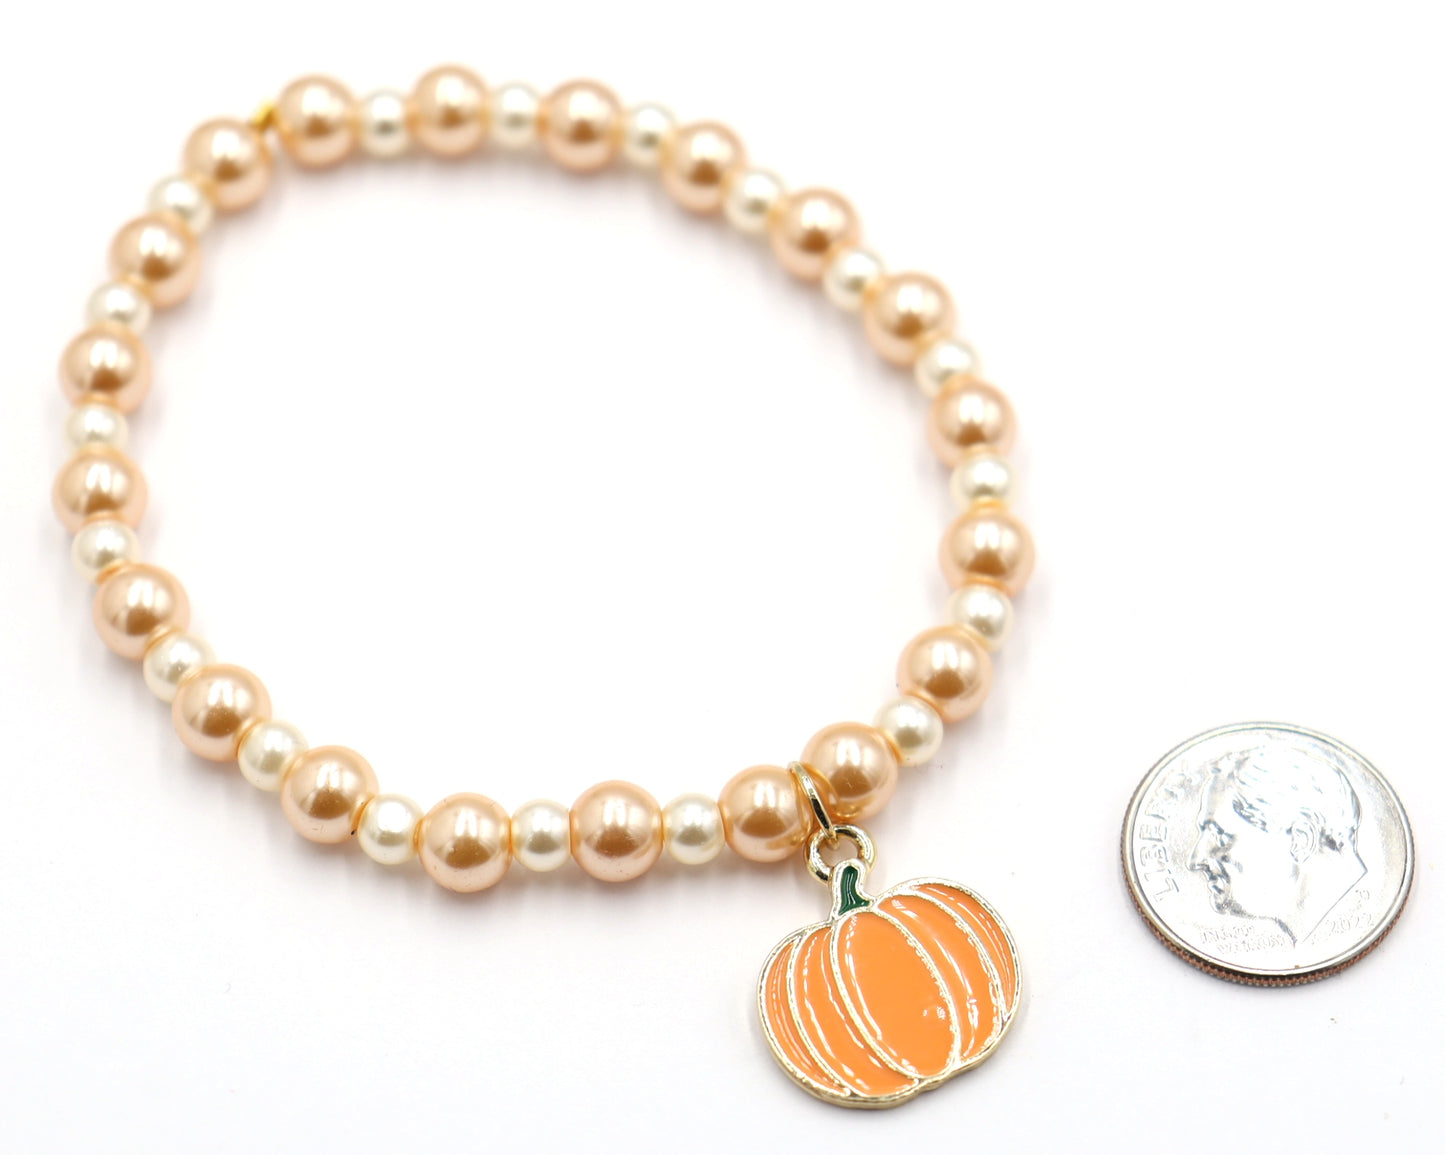 Pastels, Pearls and Pumpkin Bracelet - Girly and Classic Halloween Reimagined Bracelet by Monkey's Mojo